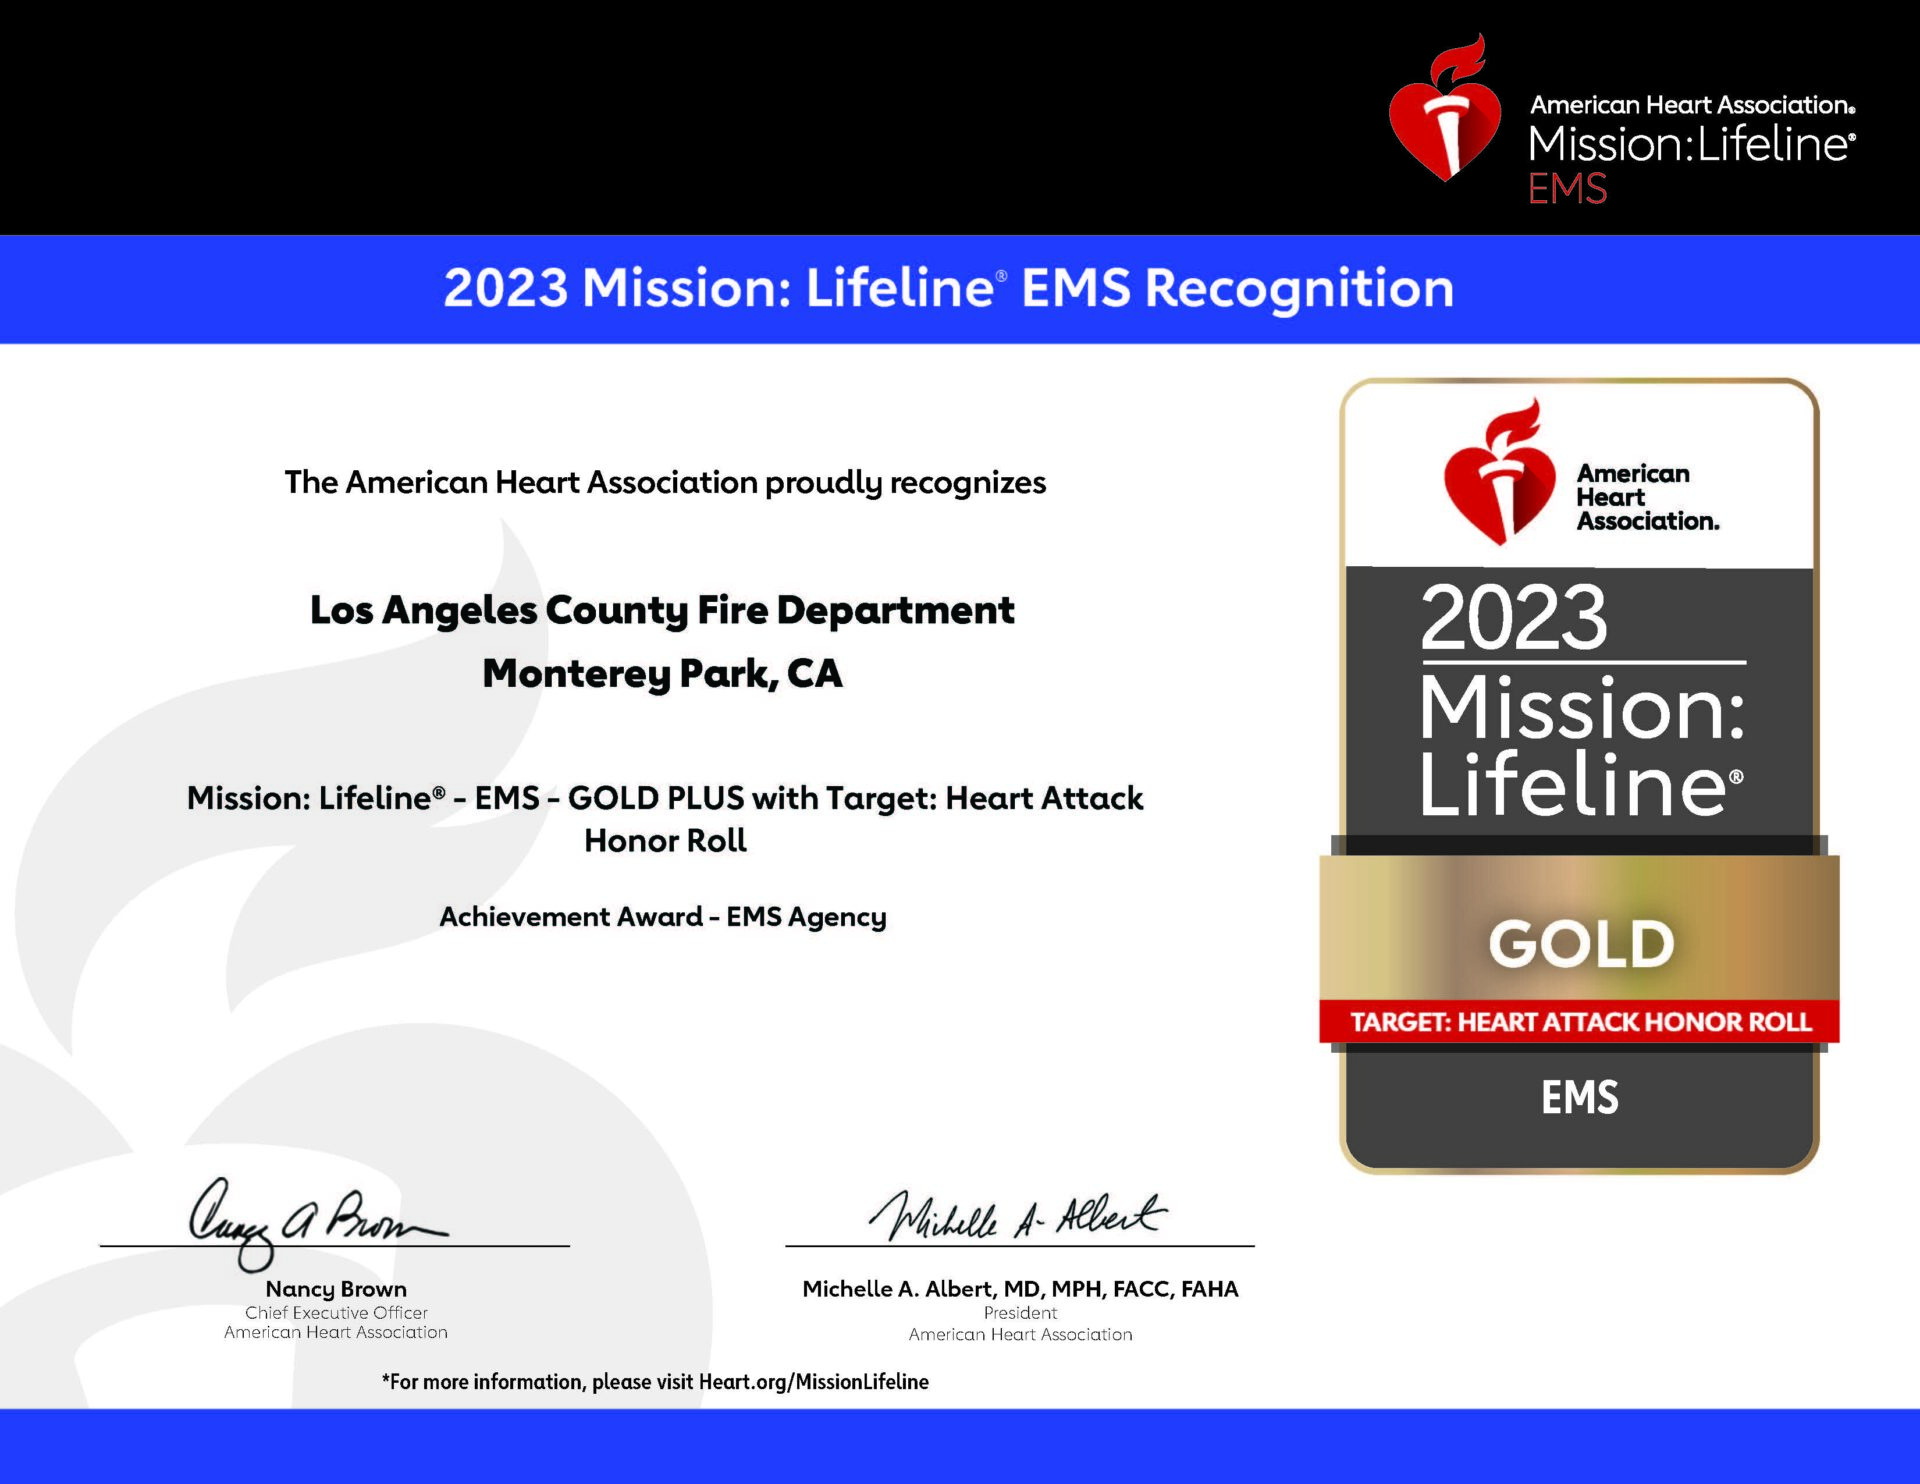 The Los Angeles County Fire Department (LACoFD) was honored with the American Heart Association’s (AHA) 2023 Mission: Lifeline EMS Gold Plus Award.